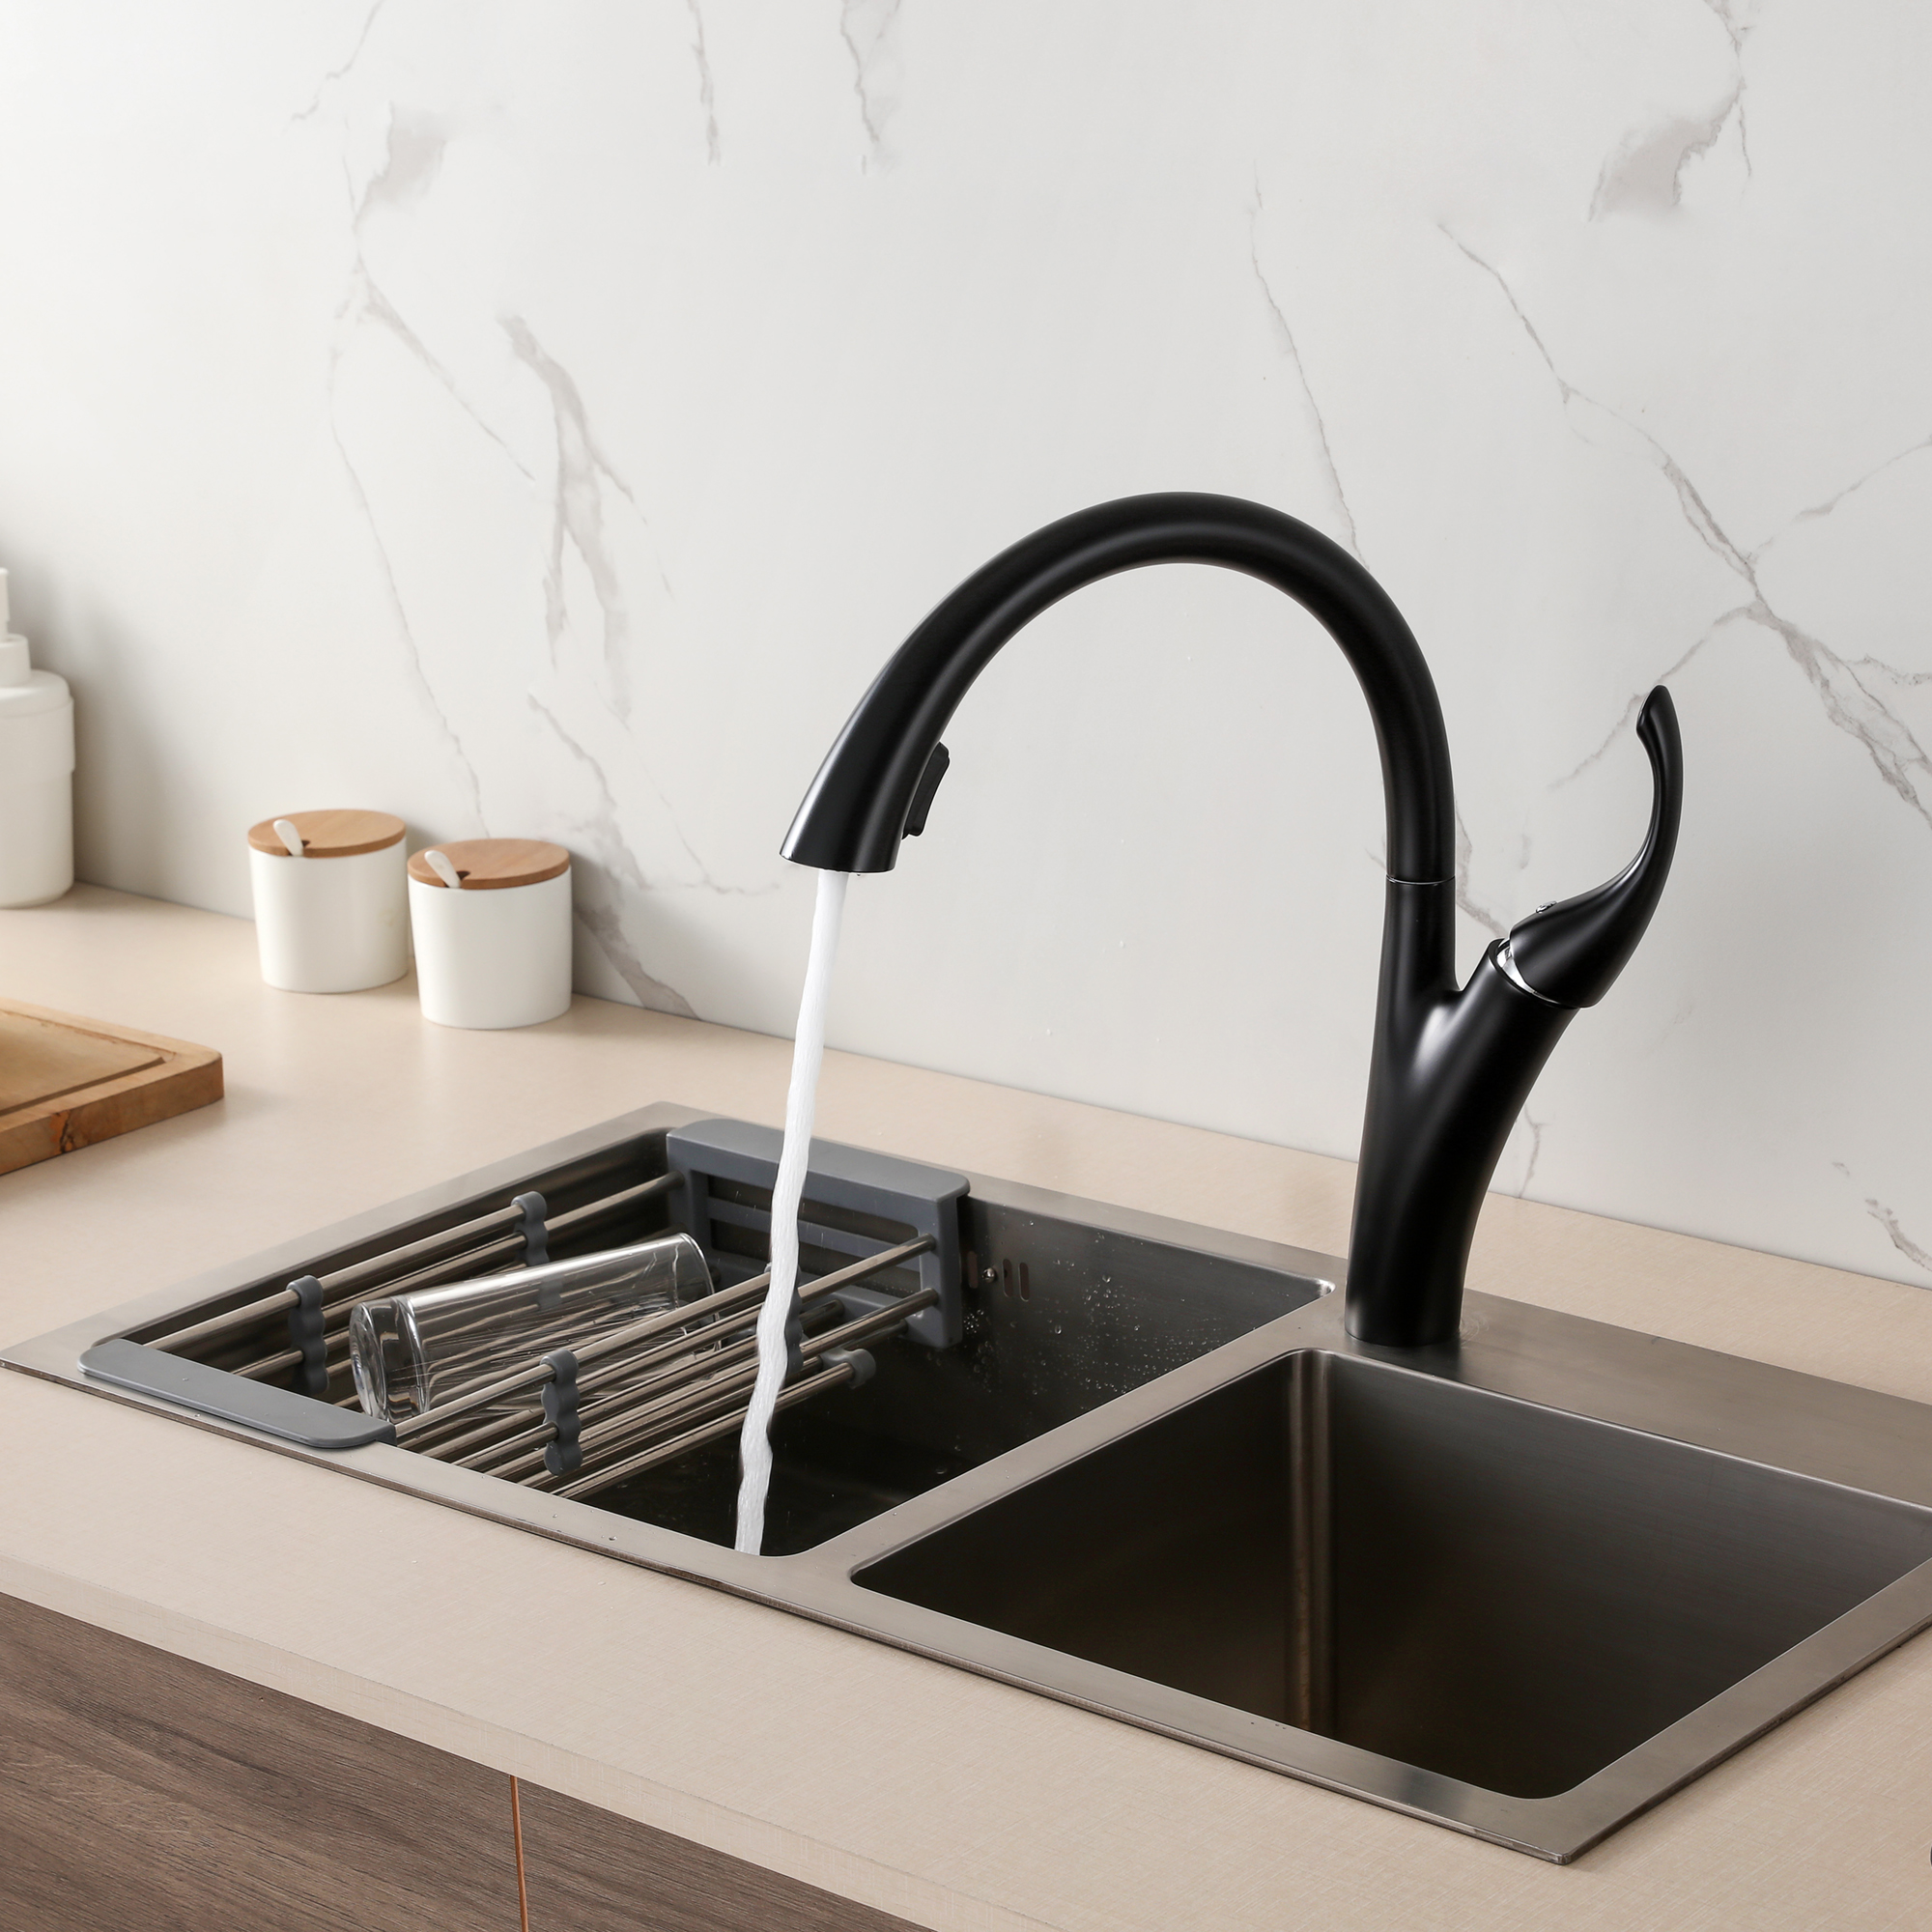 Hot Selling Zinc Best Pull Down Spray Kitchen Faucet With High Quality